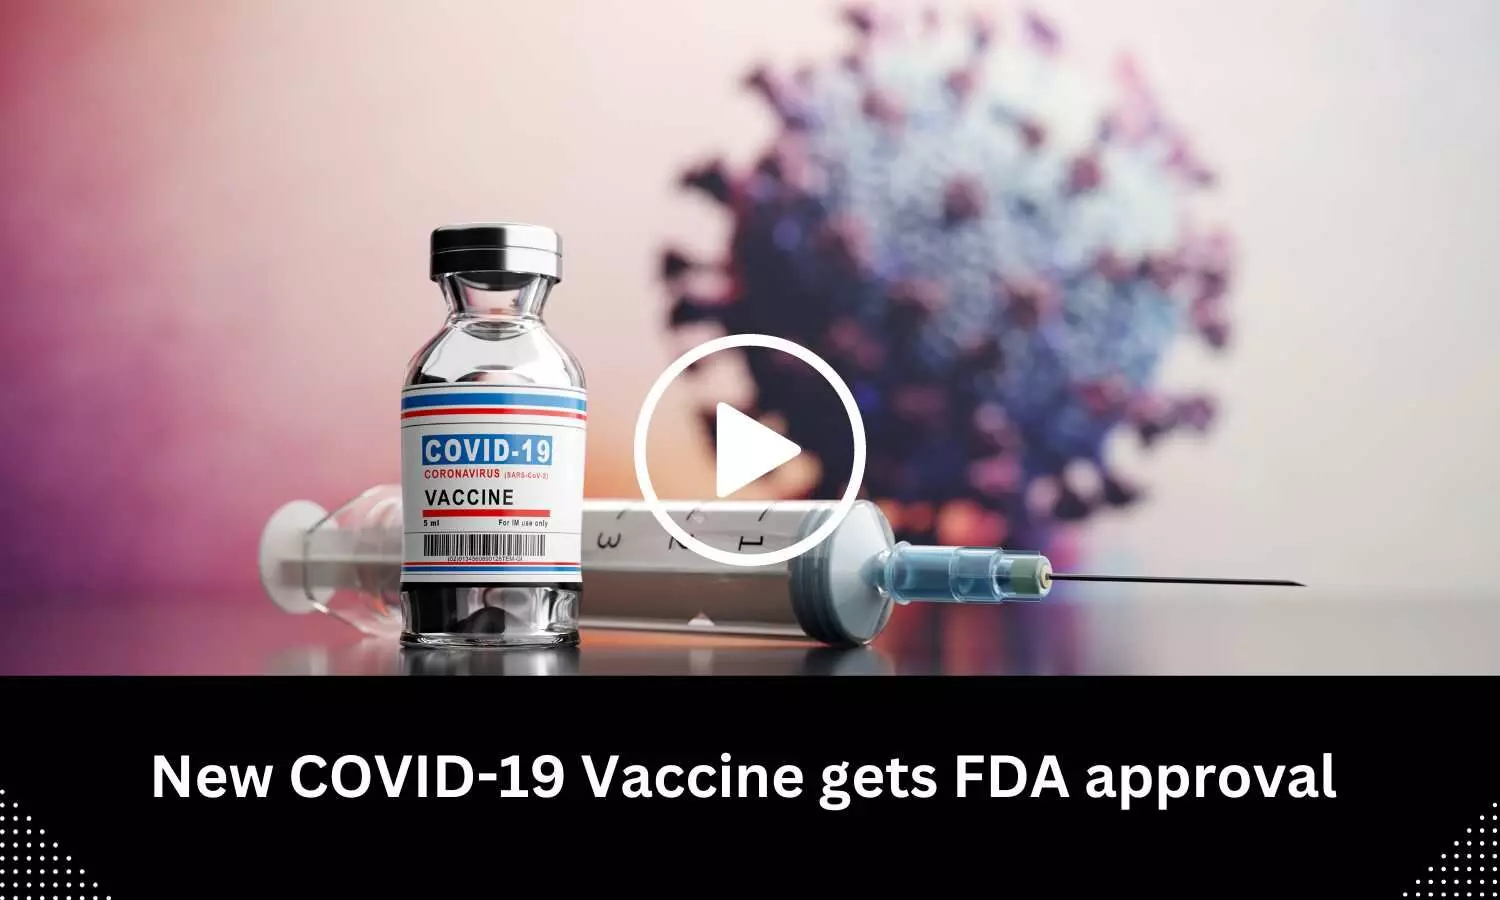 New COVID-19 Vaccine gets FDA approval